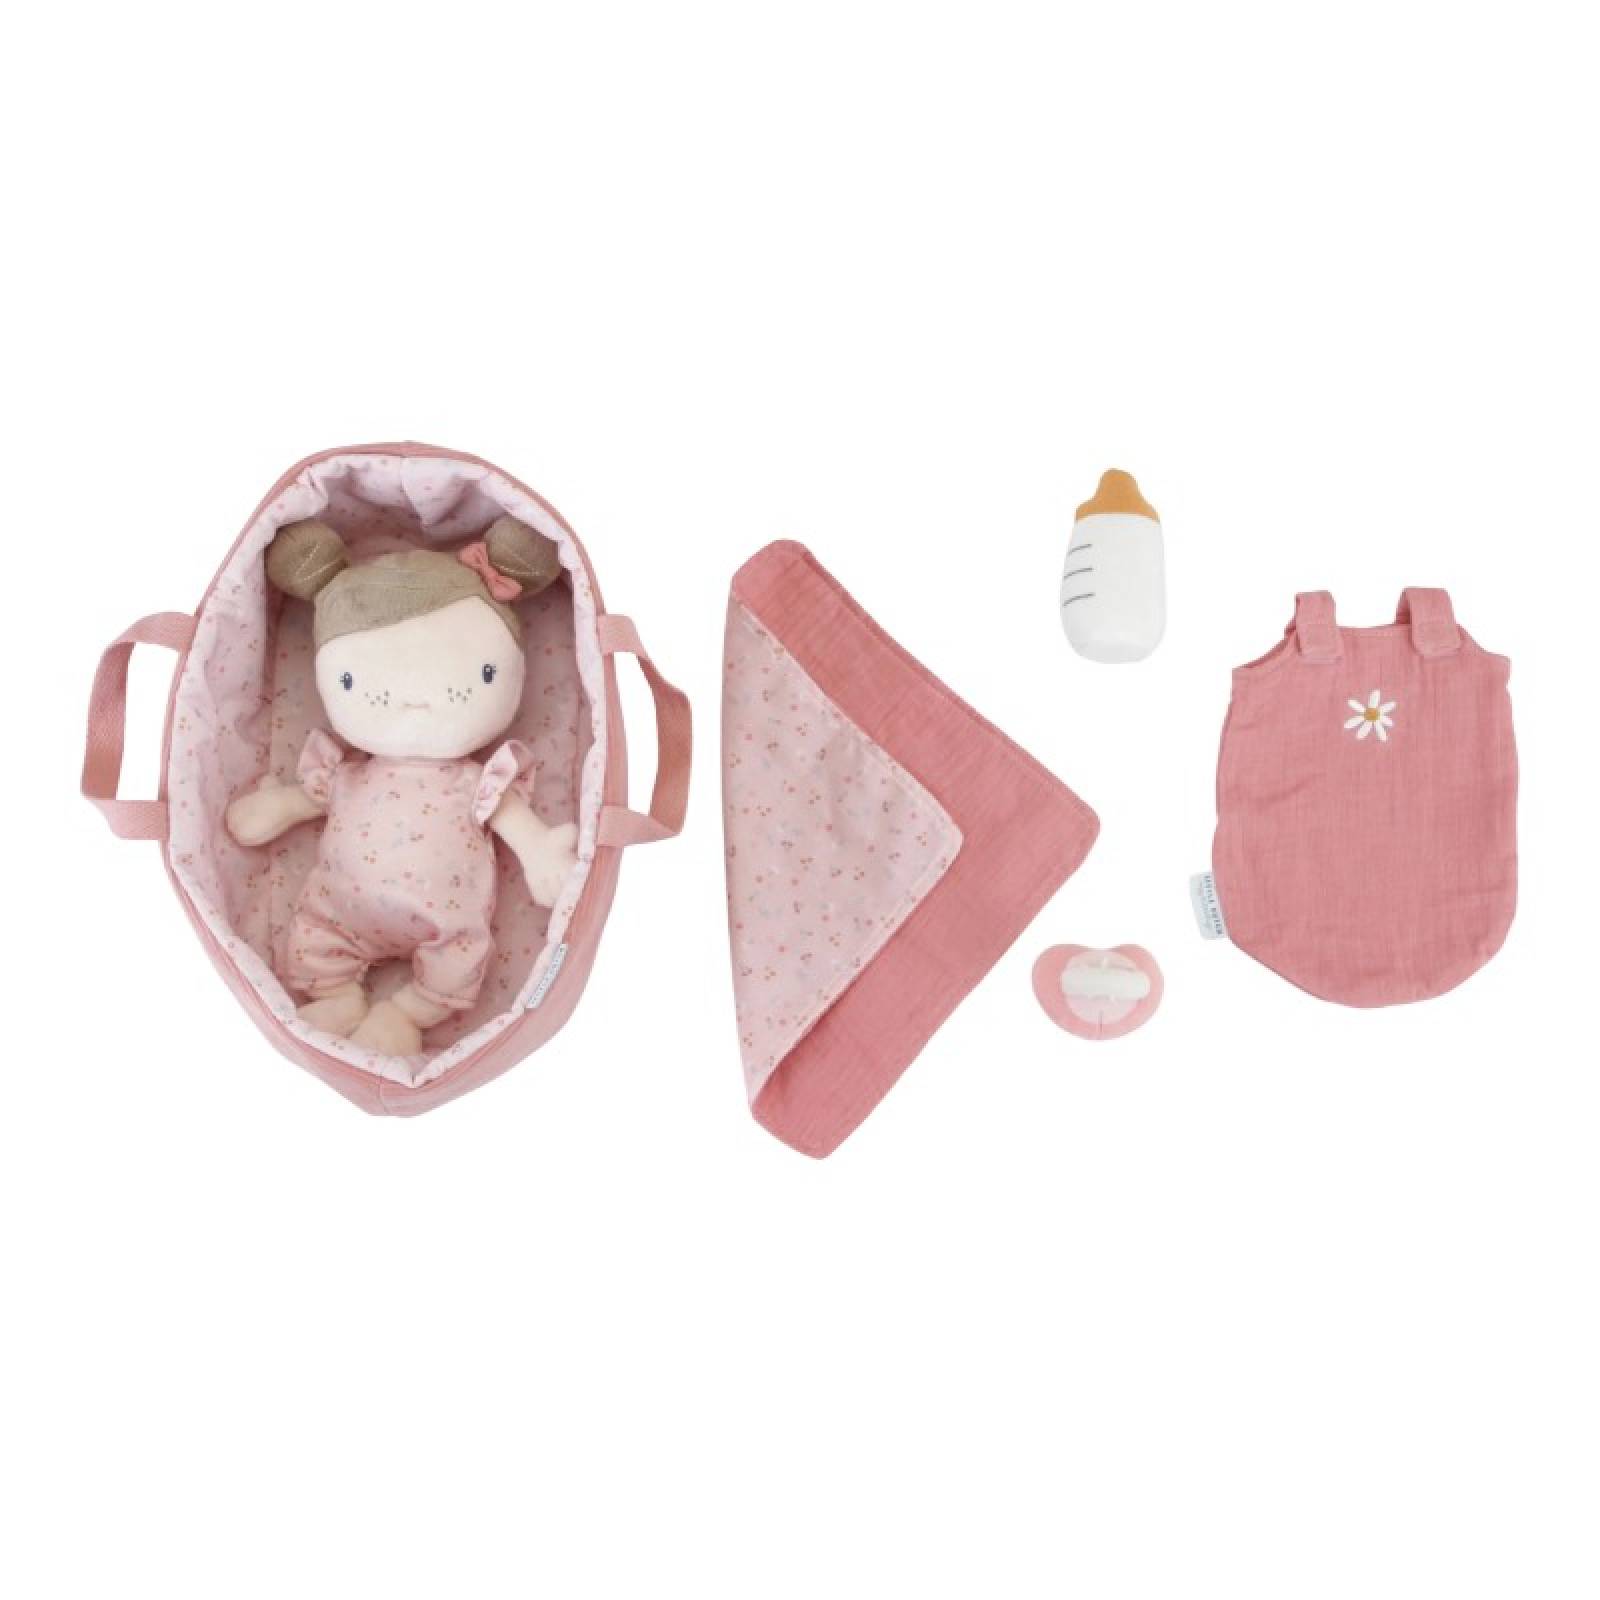 Rosa Baby Doll Toy & Accessories By Little Dutch 1+ thumbnails